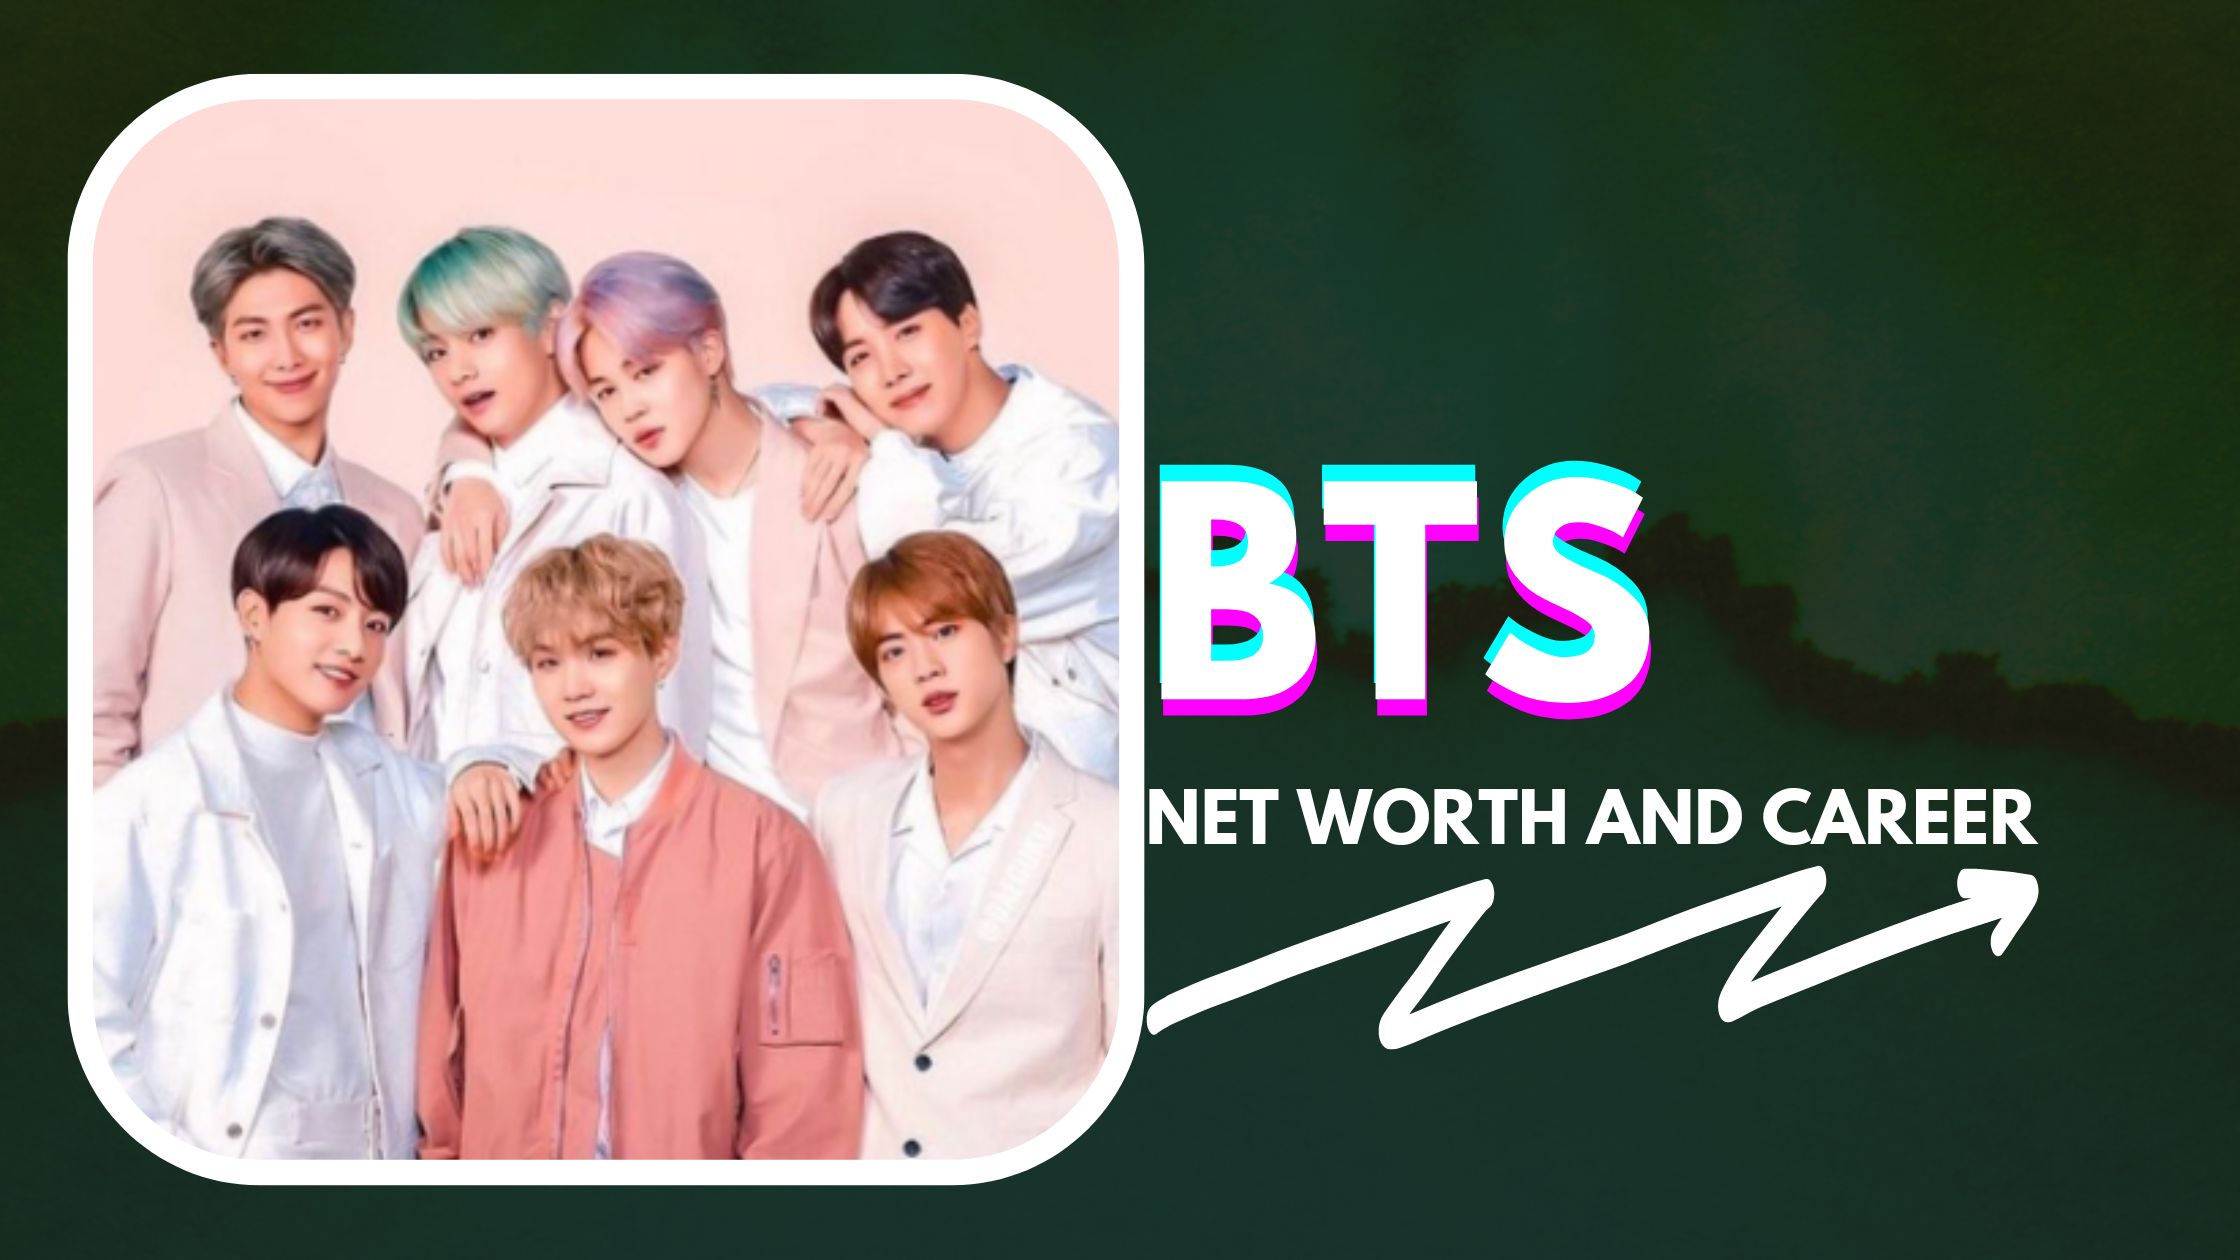 BTS net worth and career